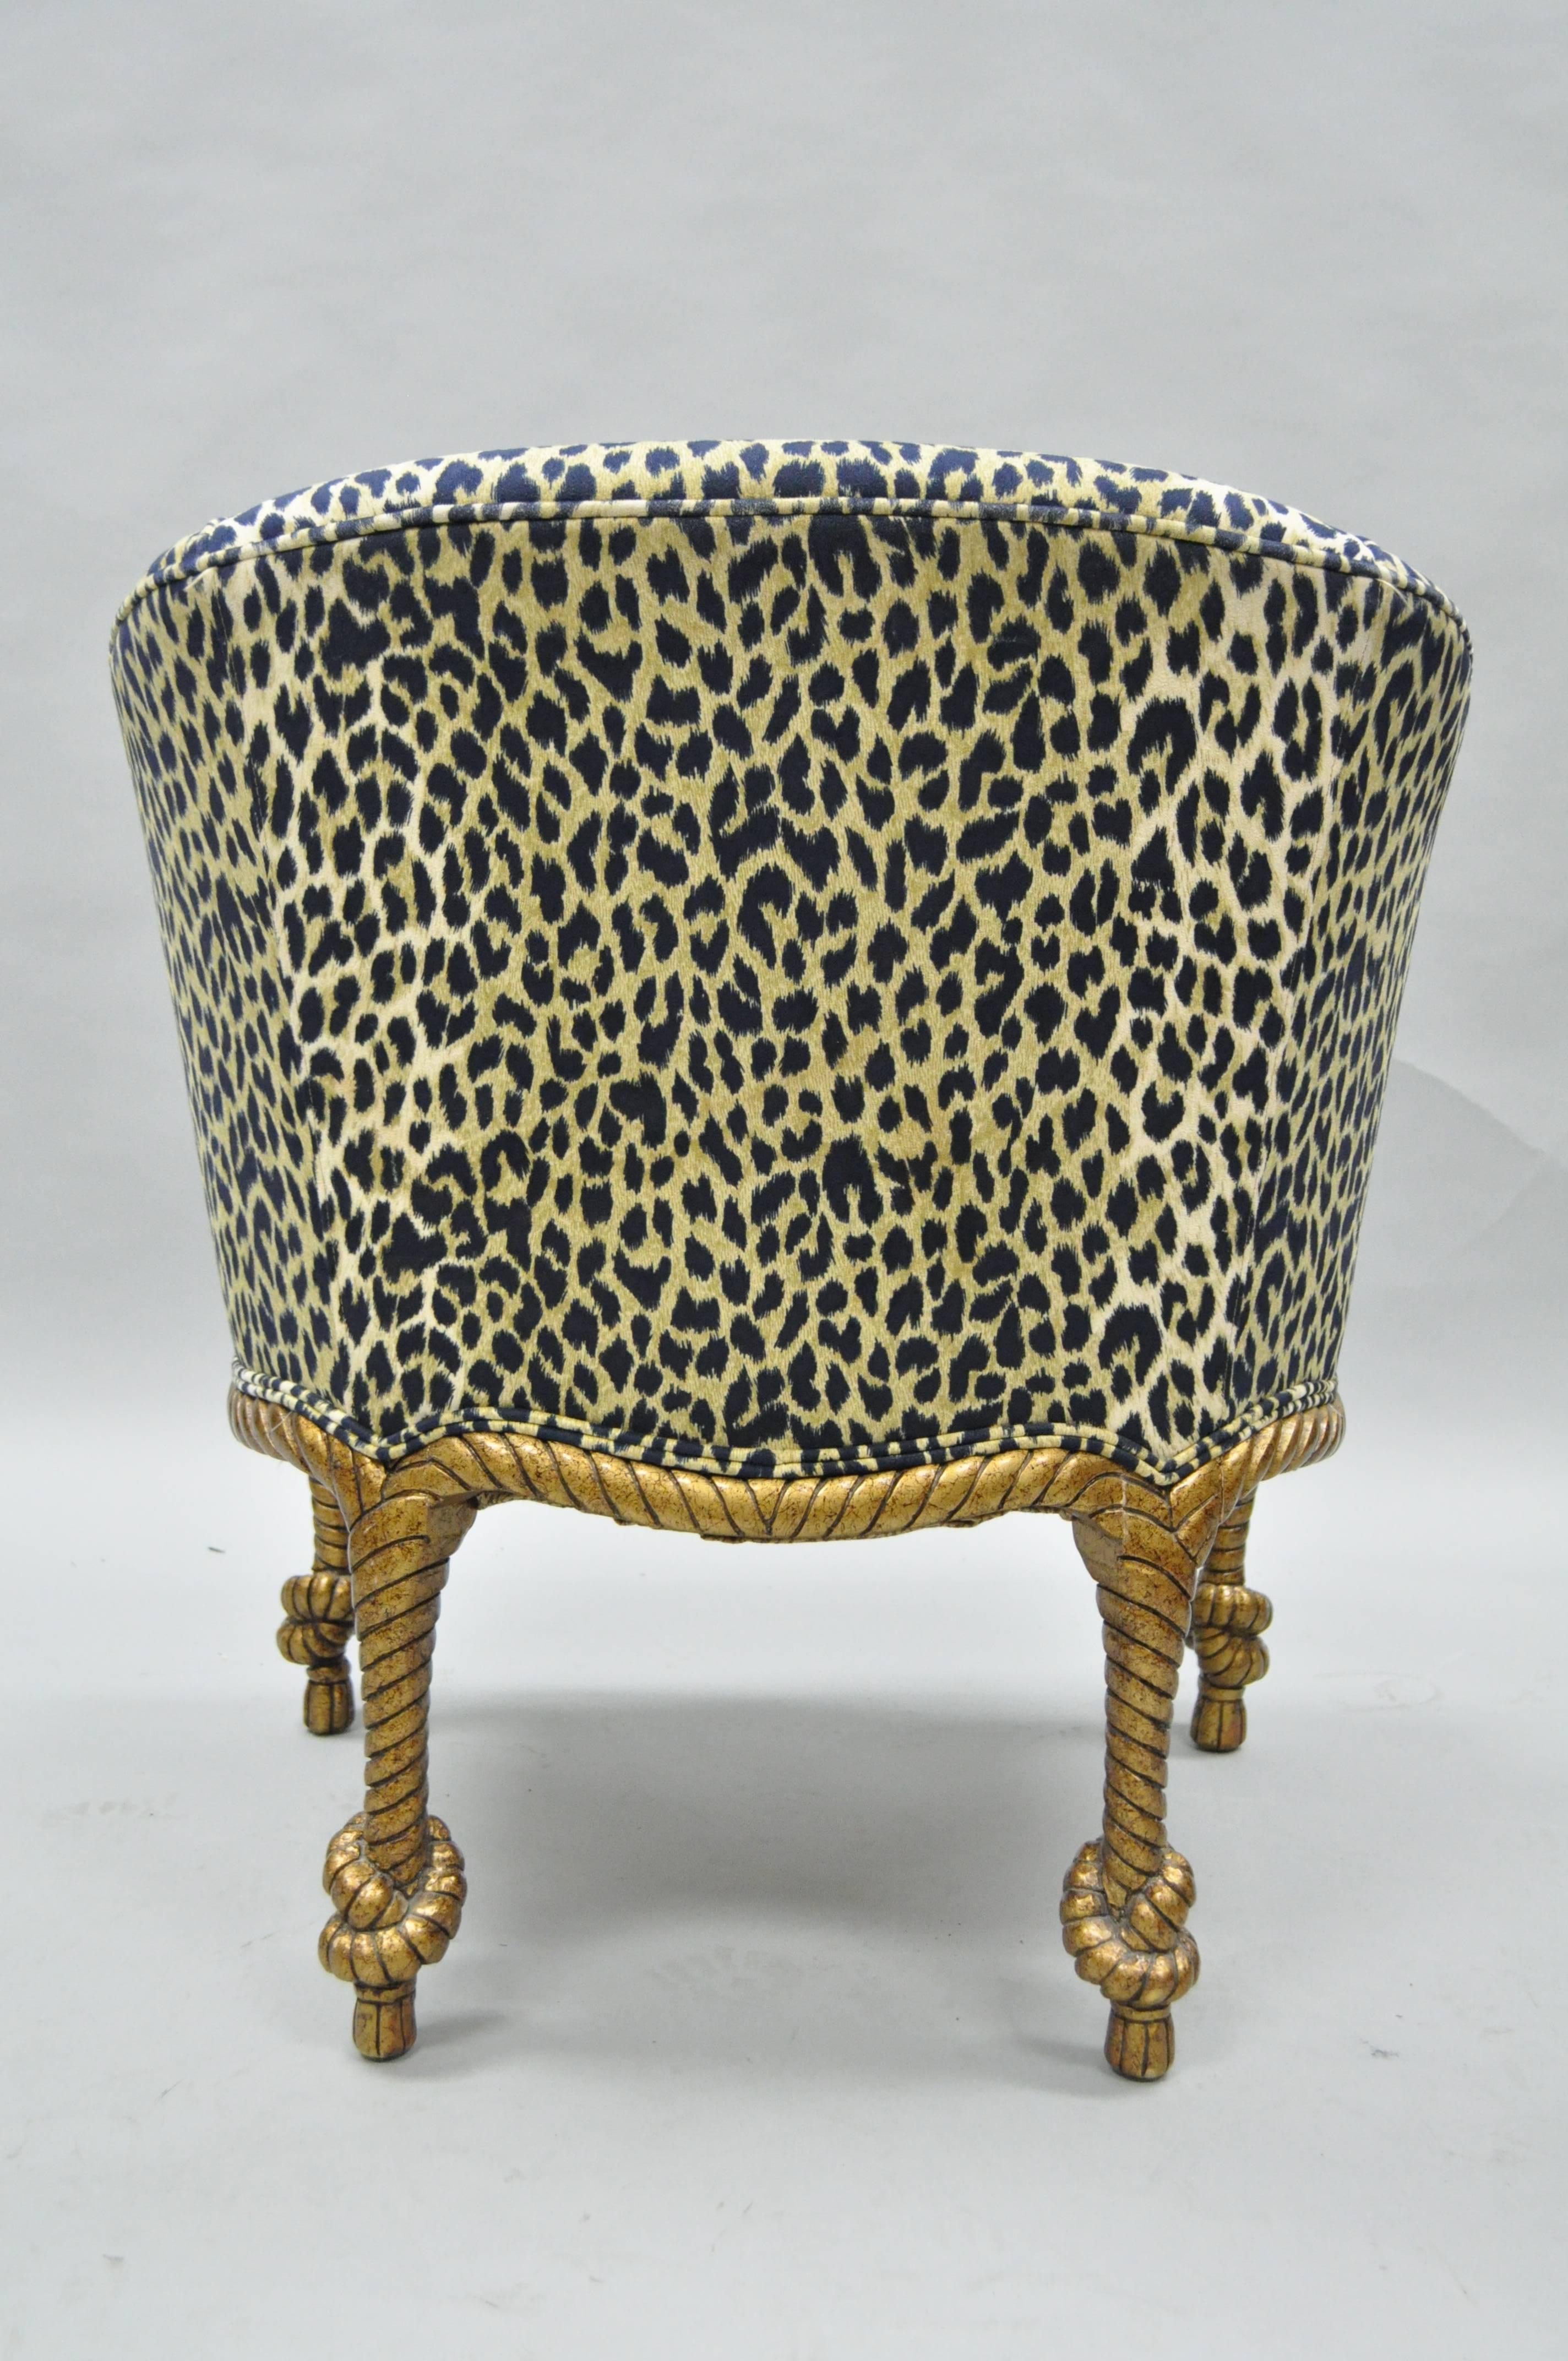 Mid-20th Century Vintage Italian Napoleon III Style Rope and Tassel Carved Gold and Leopard Chair